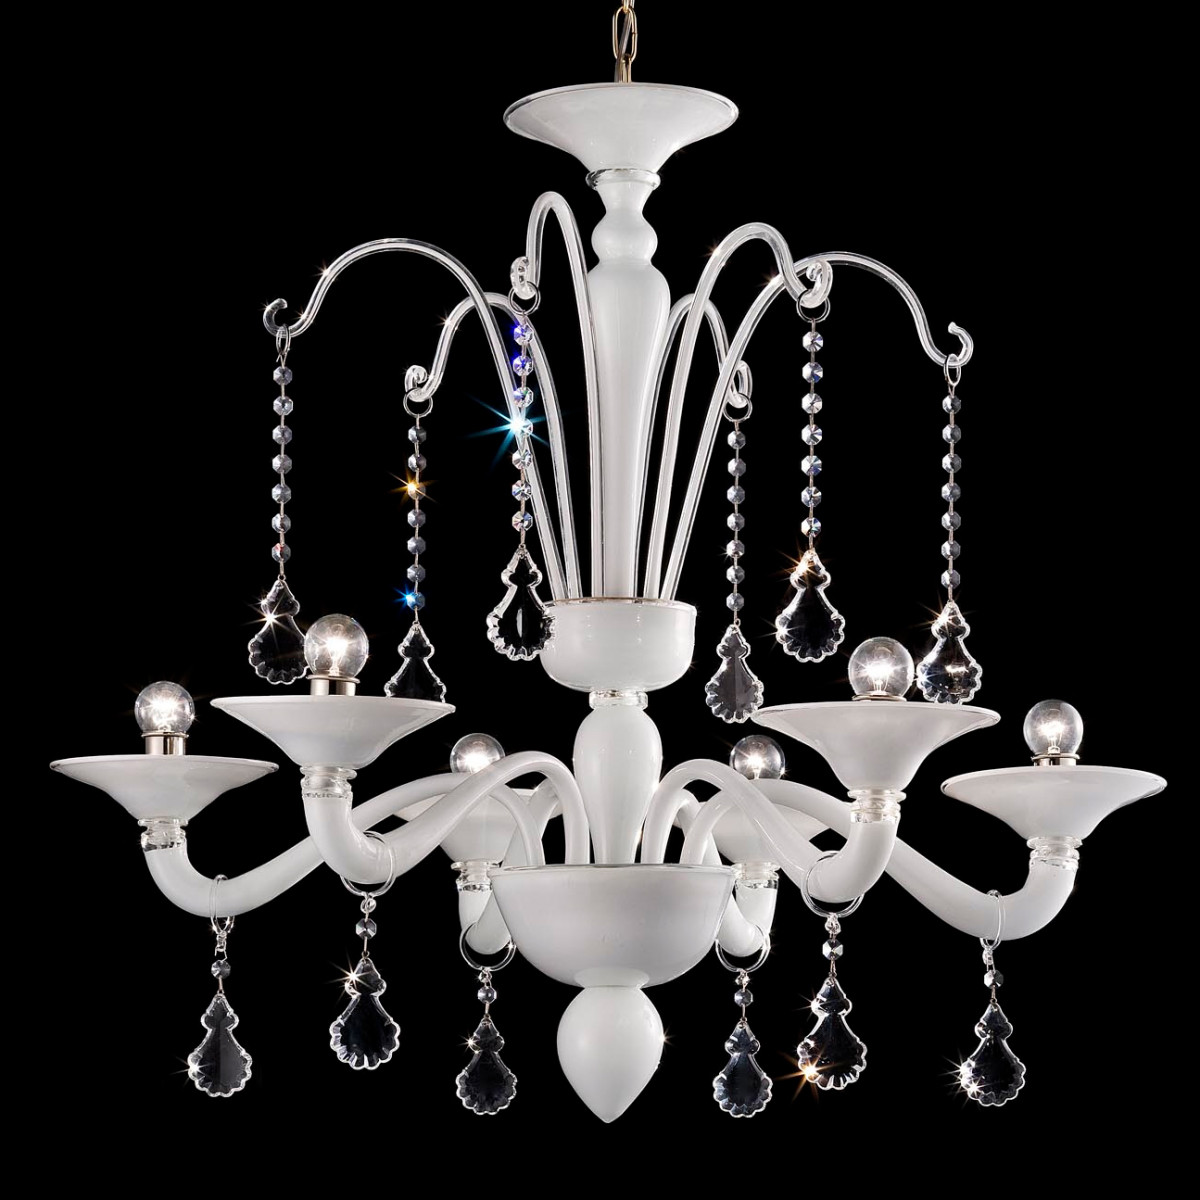 Gocce 6 lights Murano chandelier - white transparent color